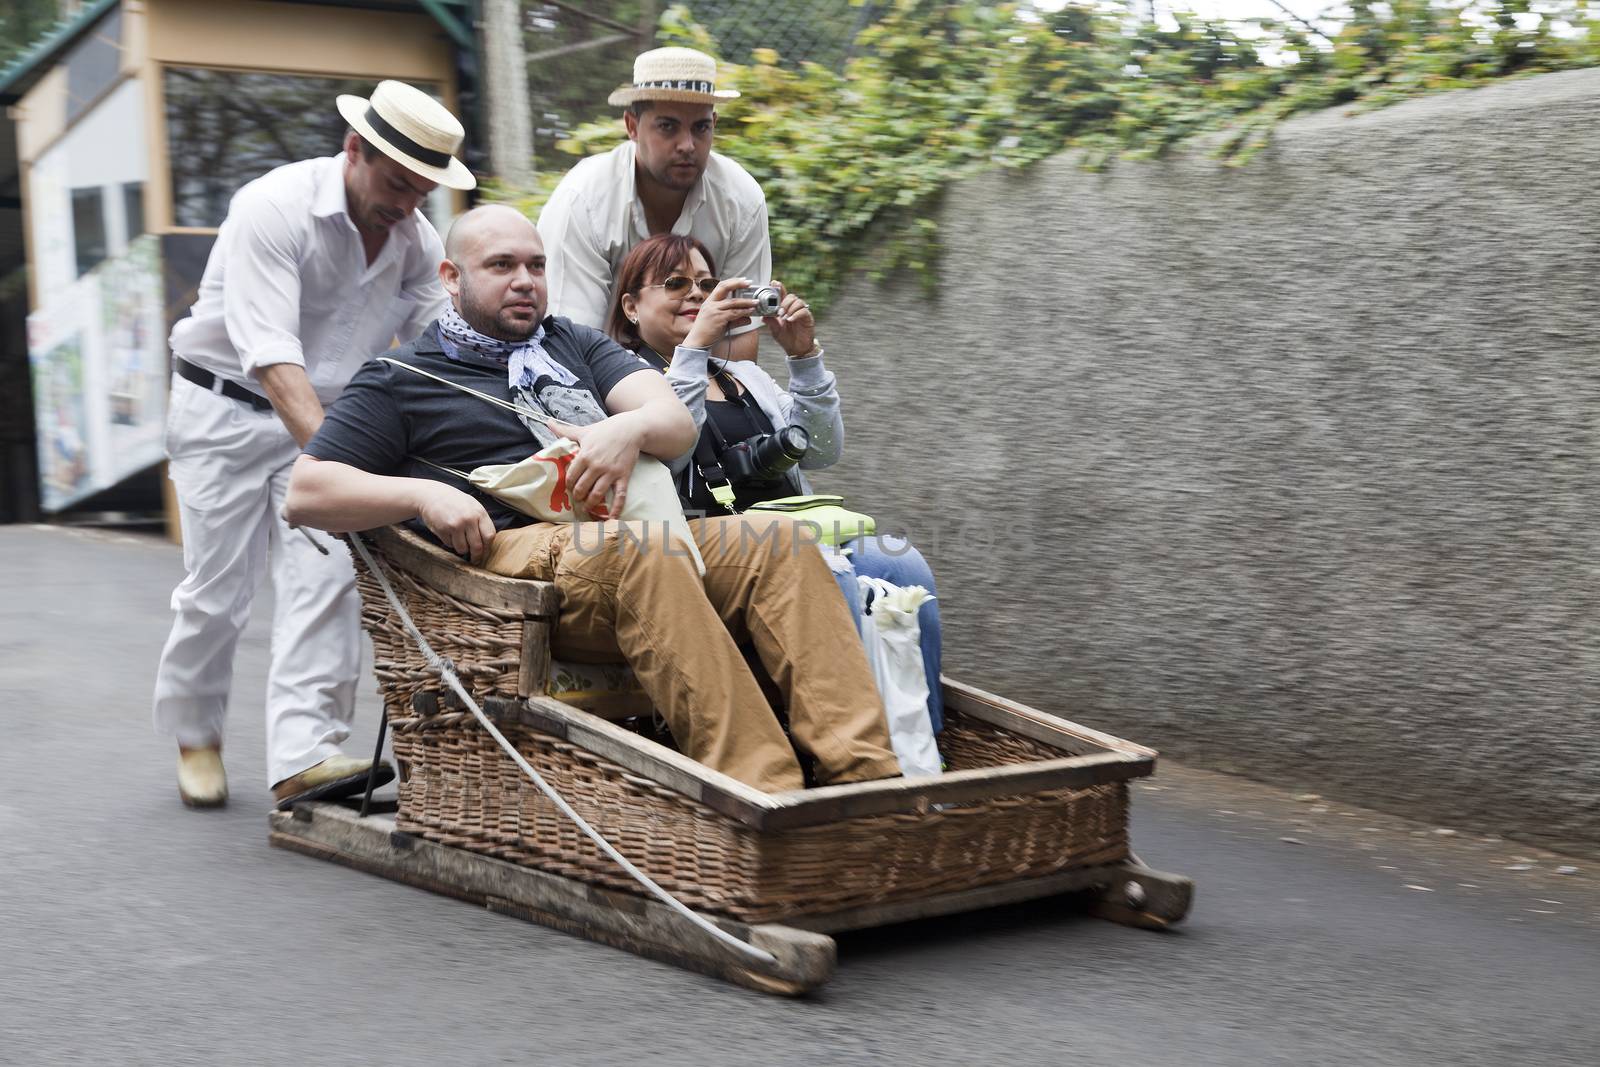 raditional downhill sledge trip on May 20, 2015 in Madeira, Portugal. Sledges were used as local transport. Currently these Toboggan riders are a touristic attraction by oleandra